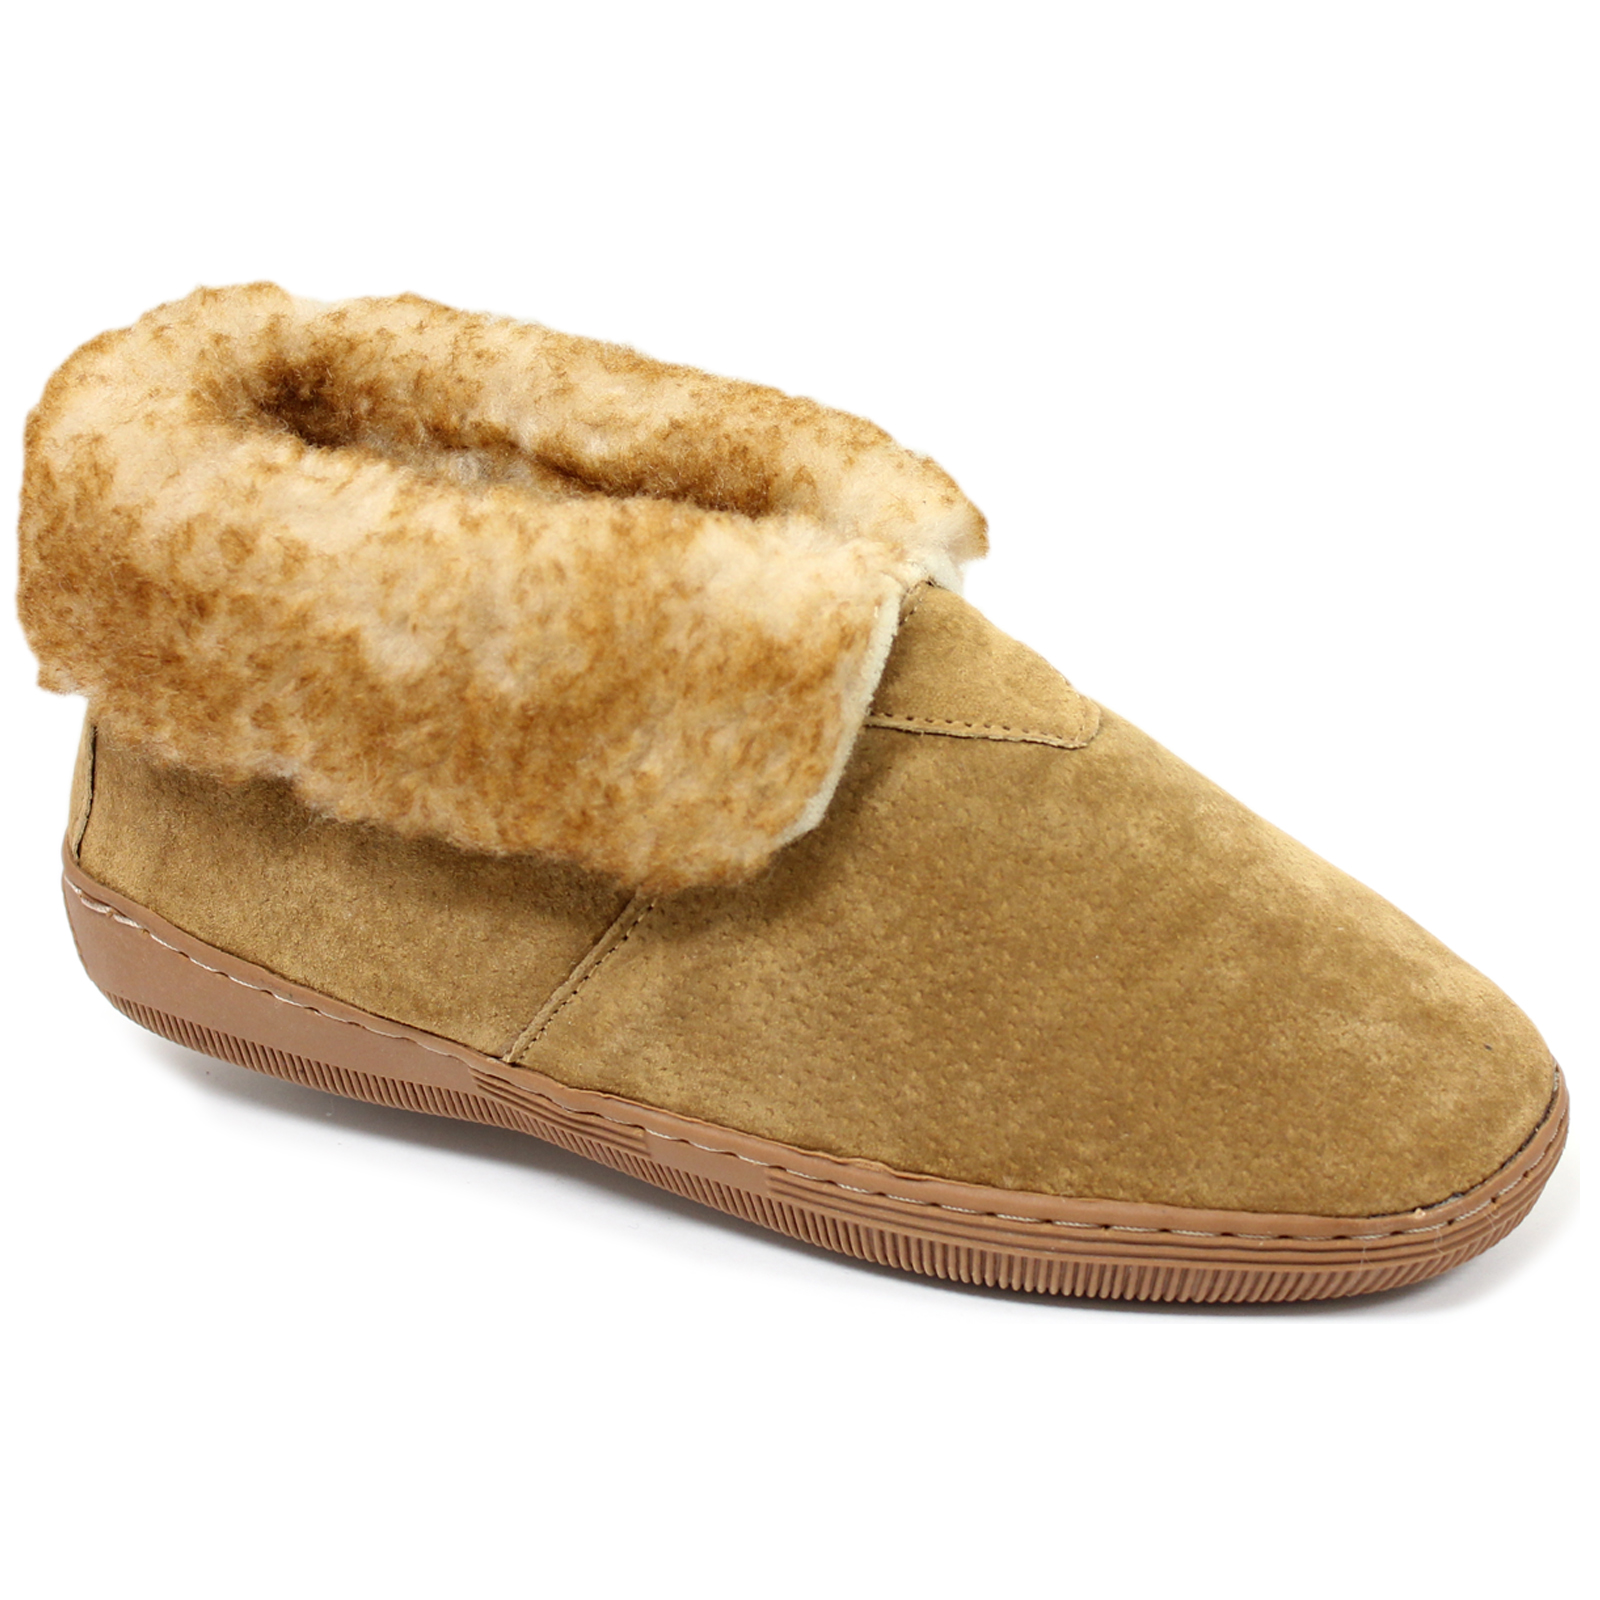 Lady's High Cut Premium Faux Shearling Bootie